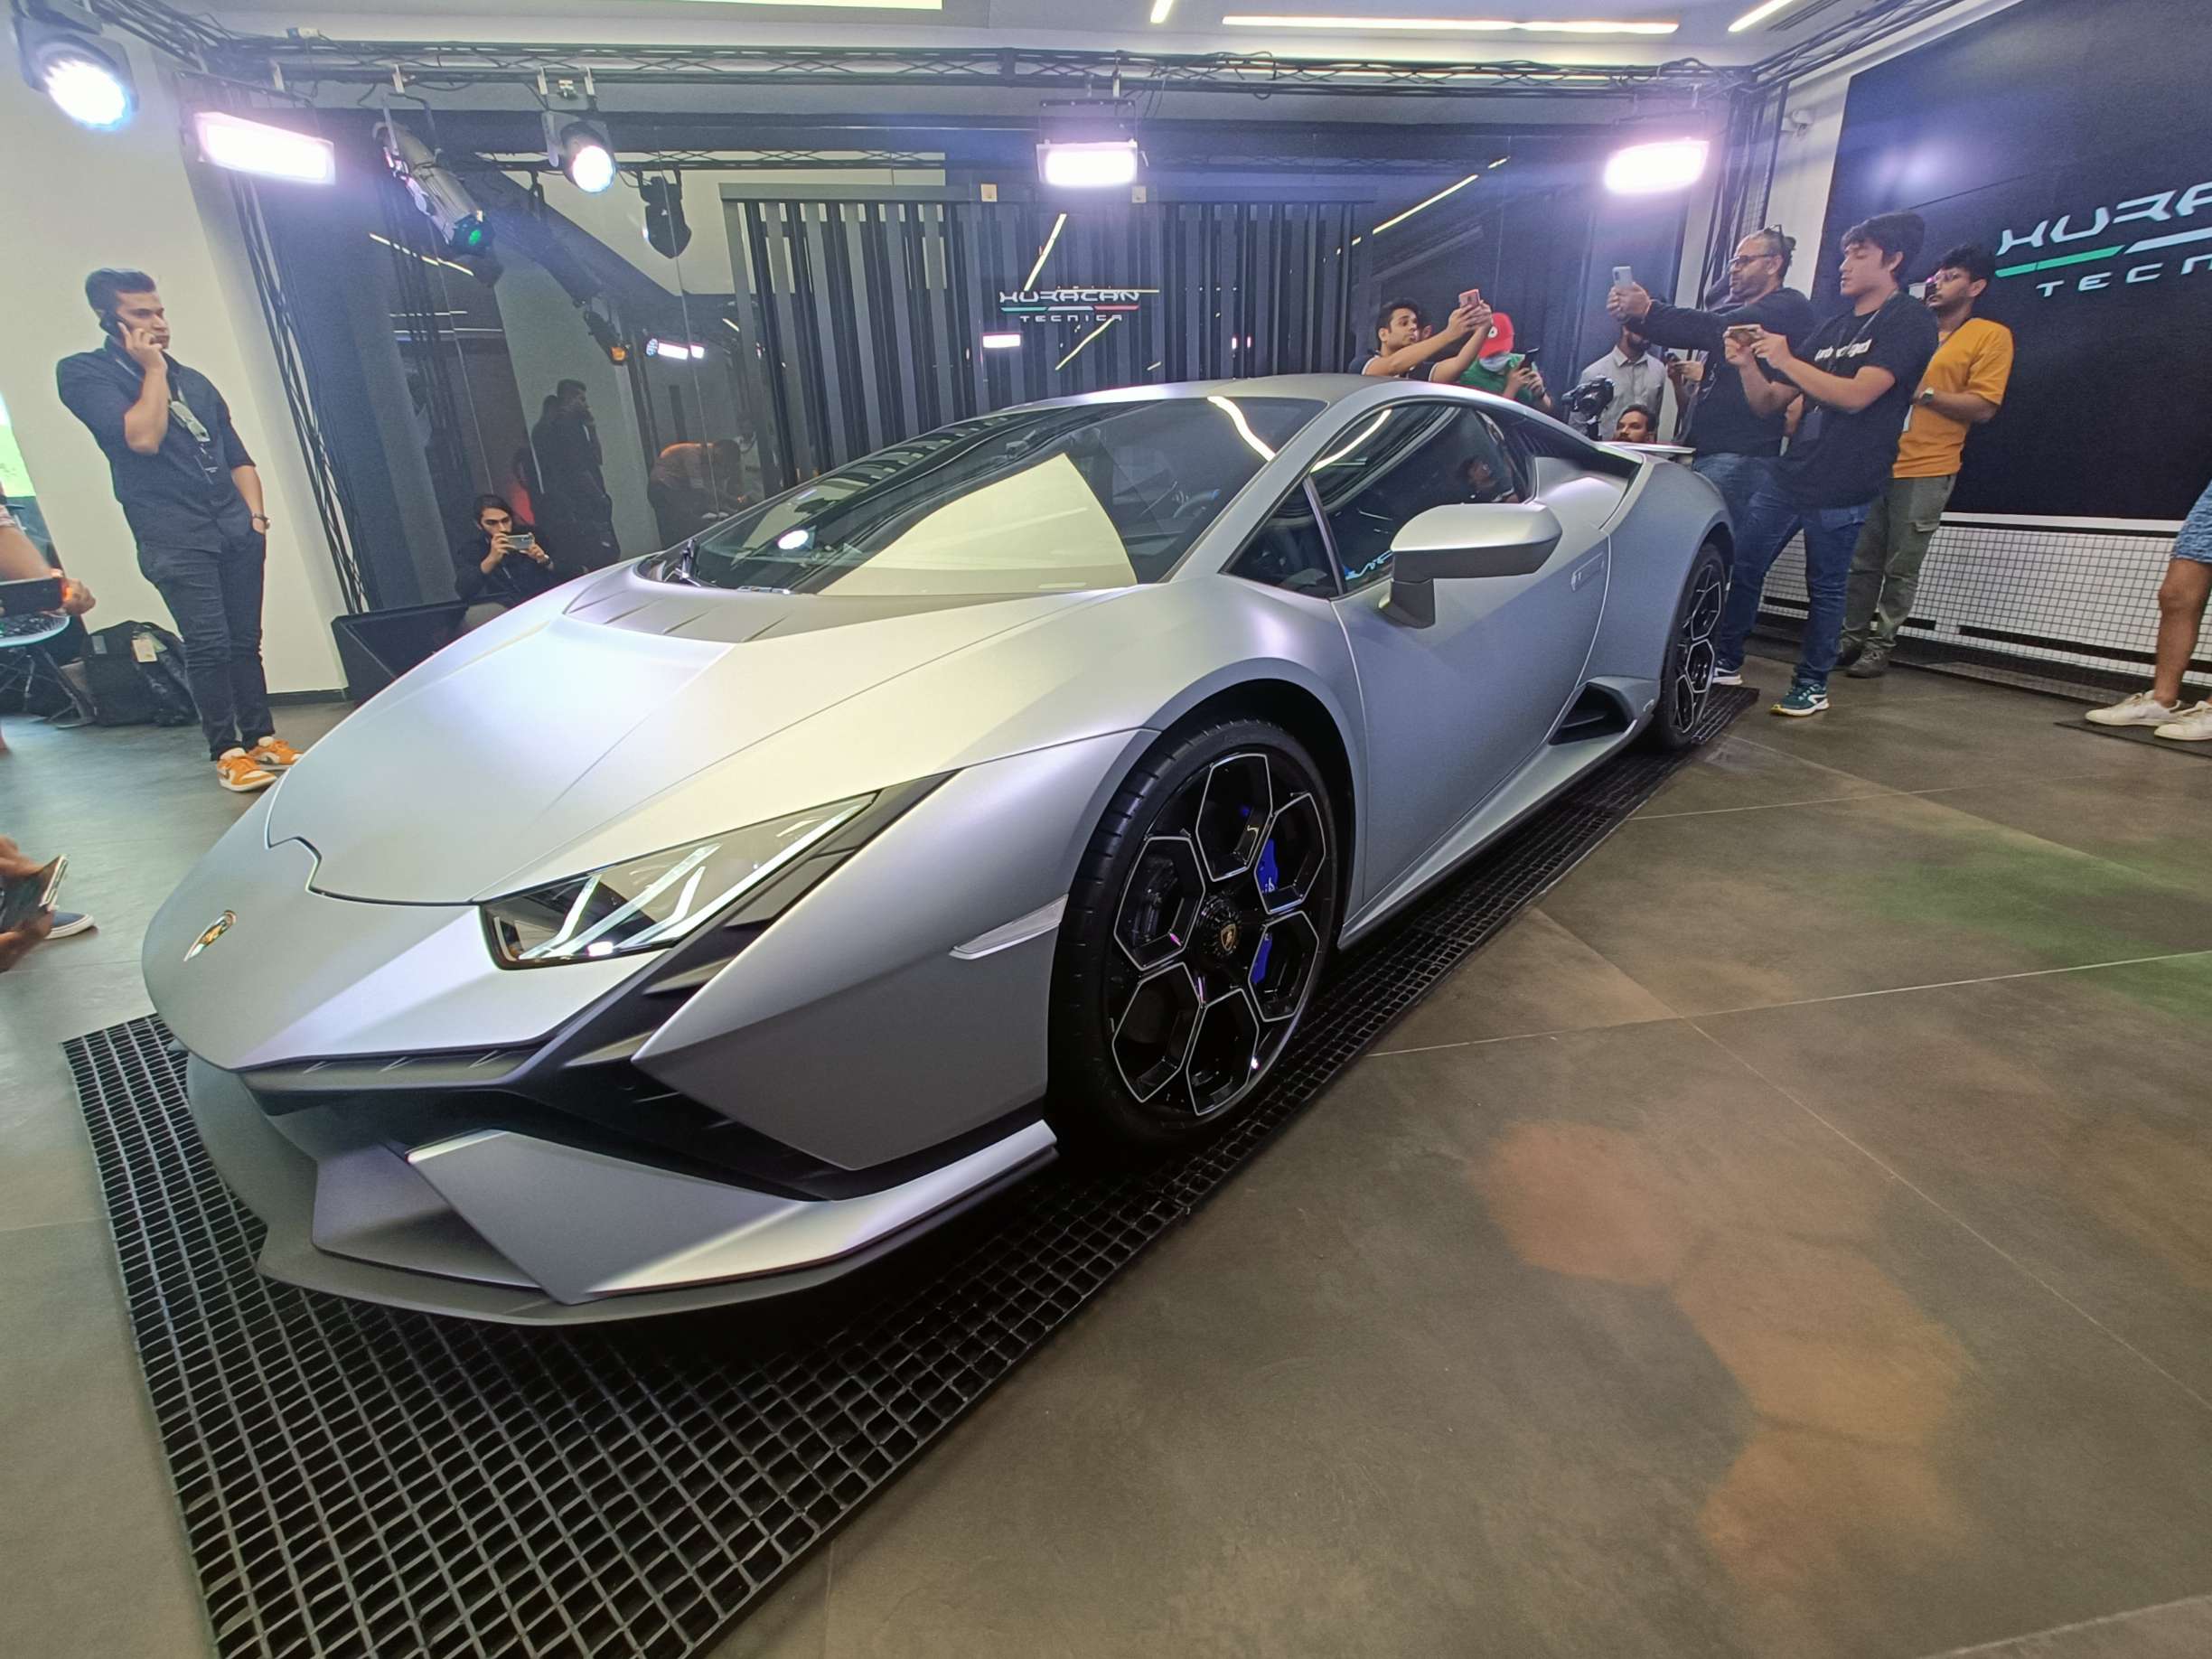 Lamborghini Huracan Tecnica Launched In India. Check Out This Supercar